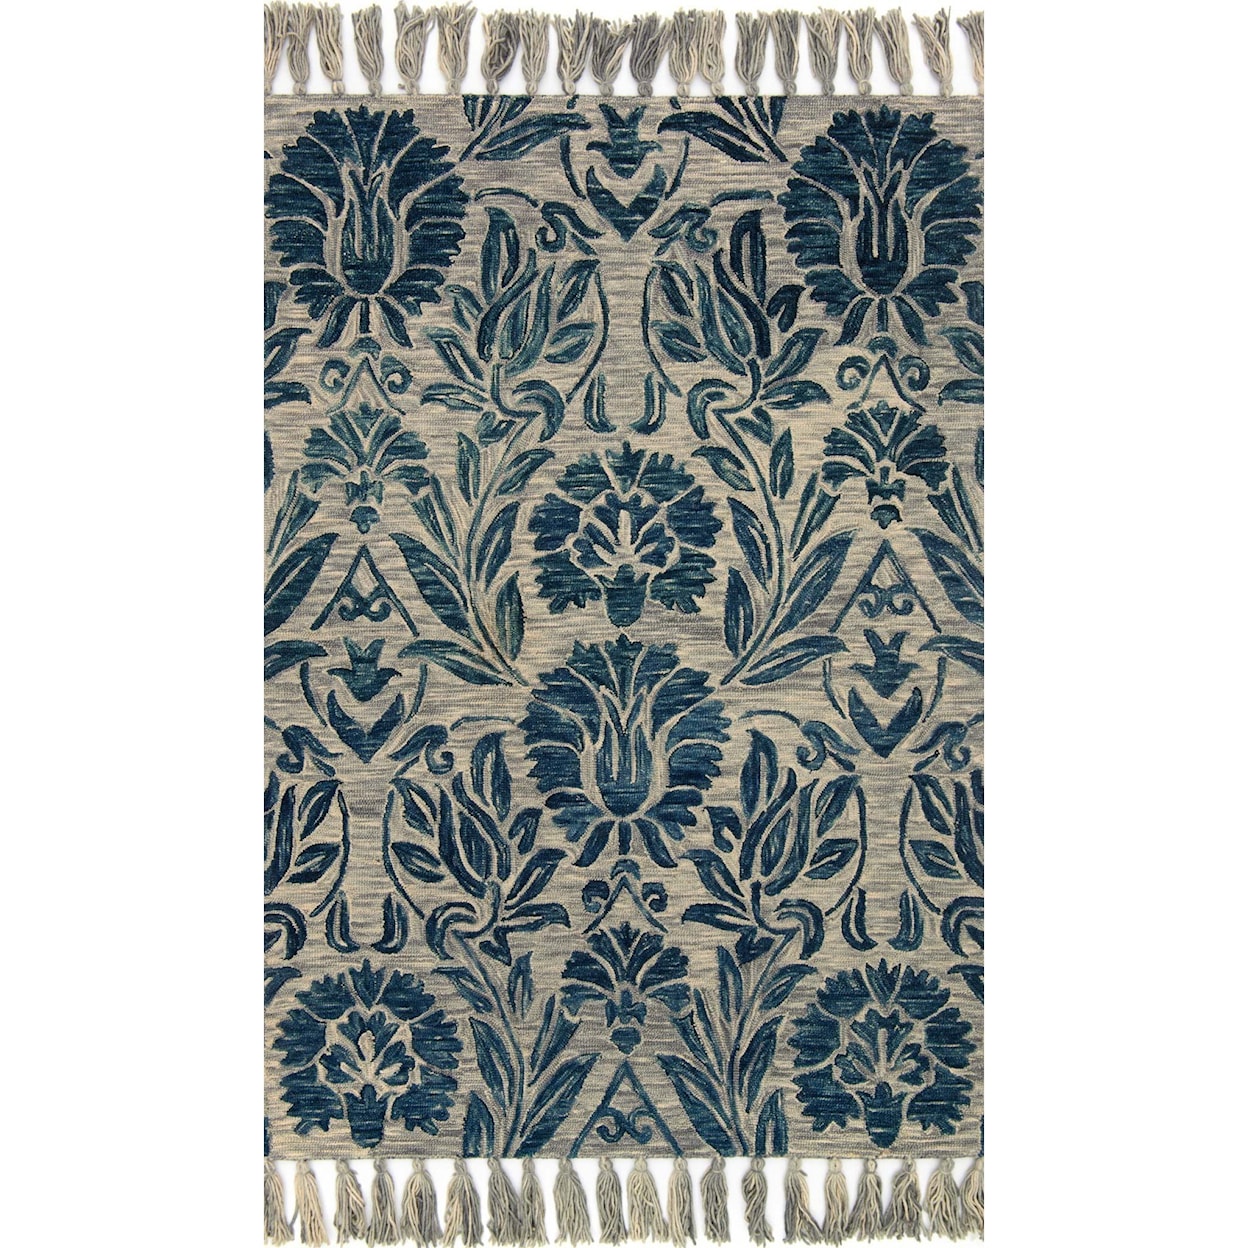 Magnolia Home by Joanna Gaines for Loloi Jozie Day 5' 0" x 7' 6" Rectangle Rug